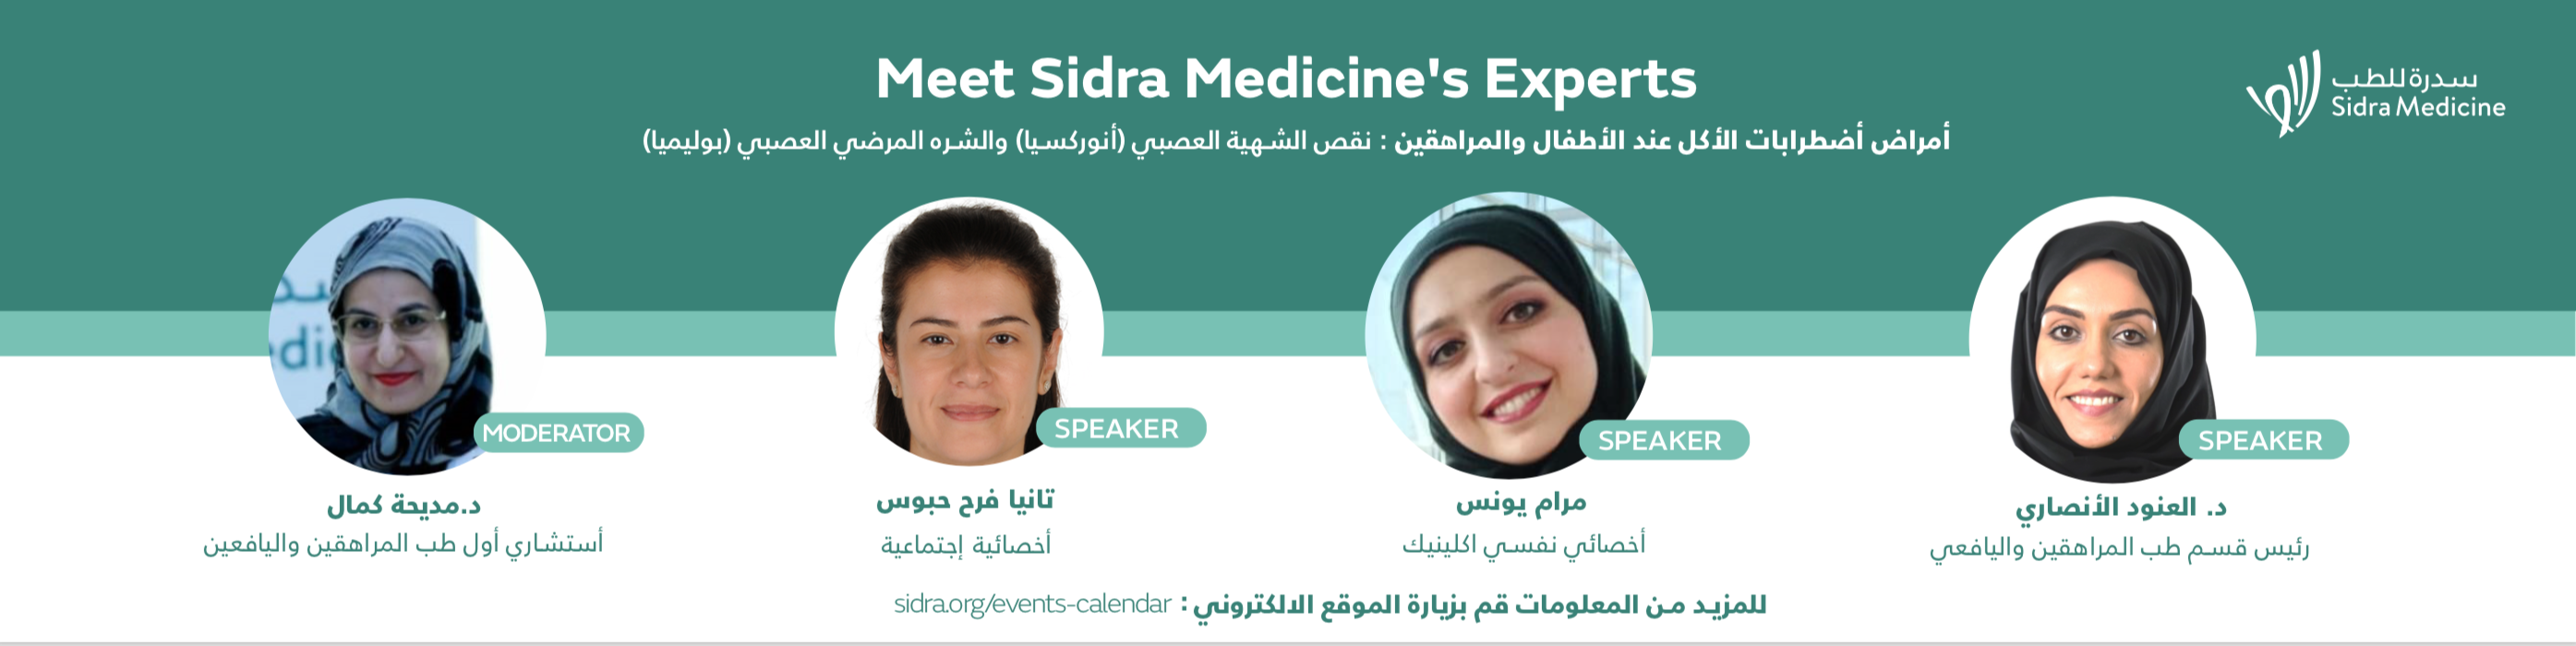 Meet Sidra Medicine's Experts: Overview of Eating Disorders in children and teens, Anorexia Nervosa and Bulimia Nervosa.